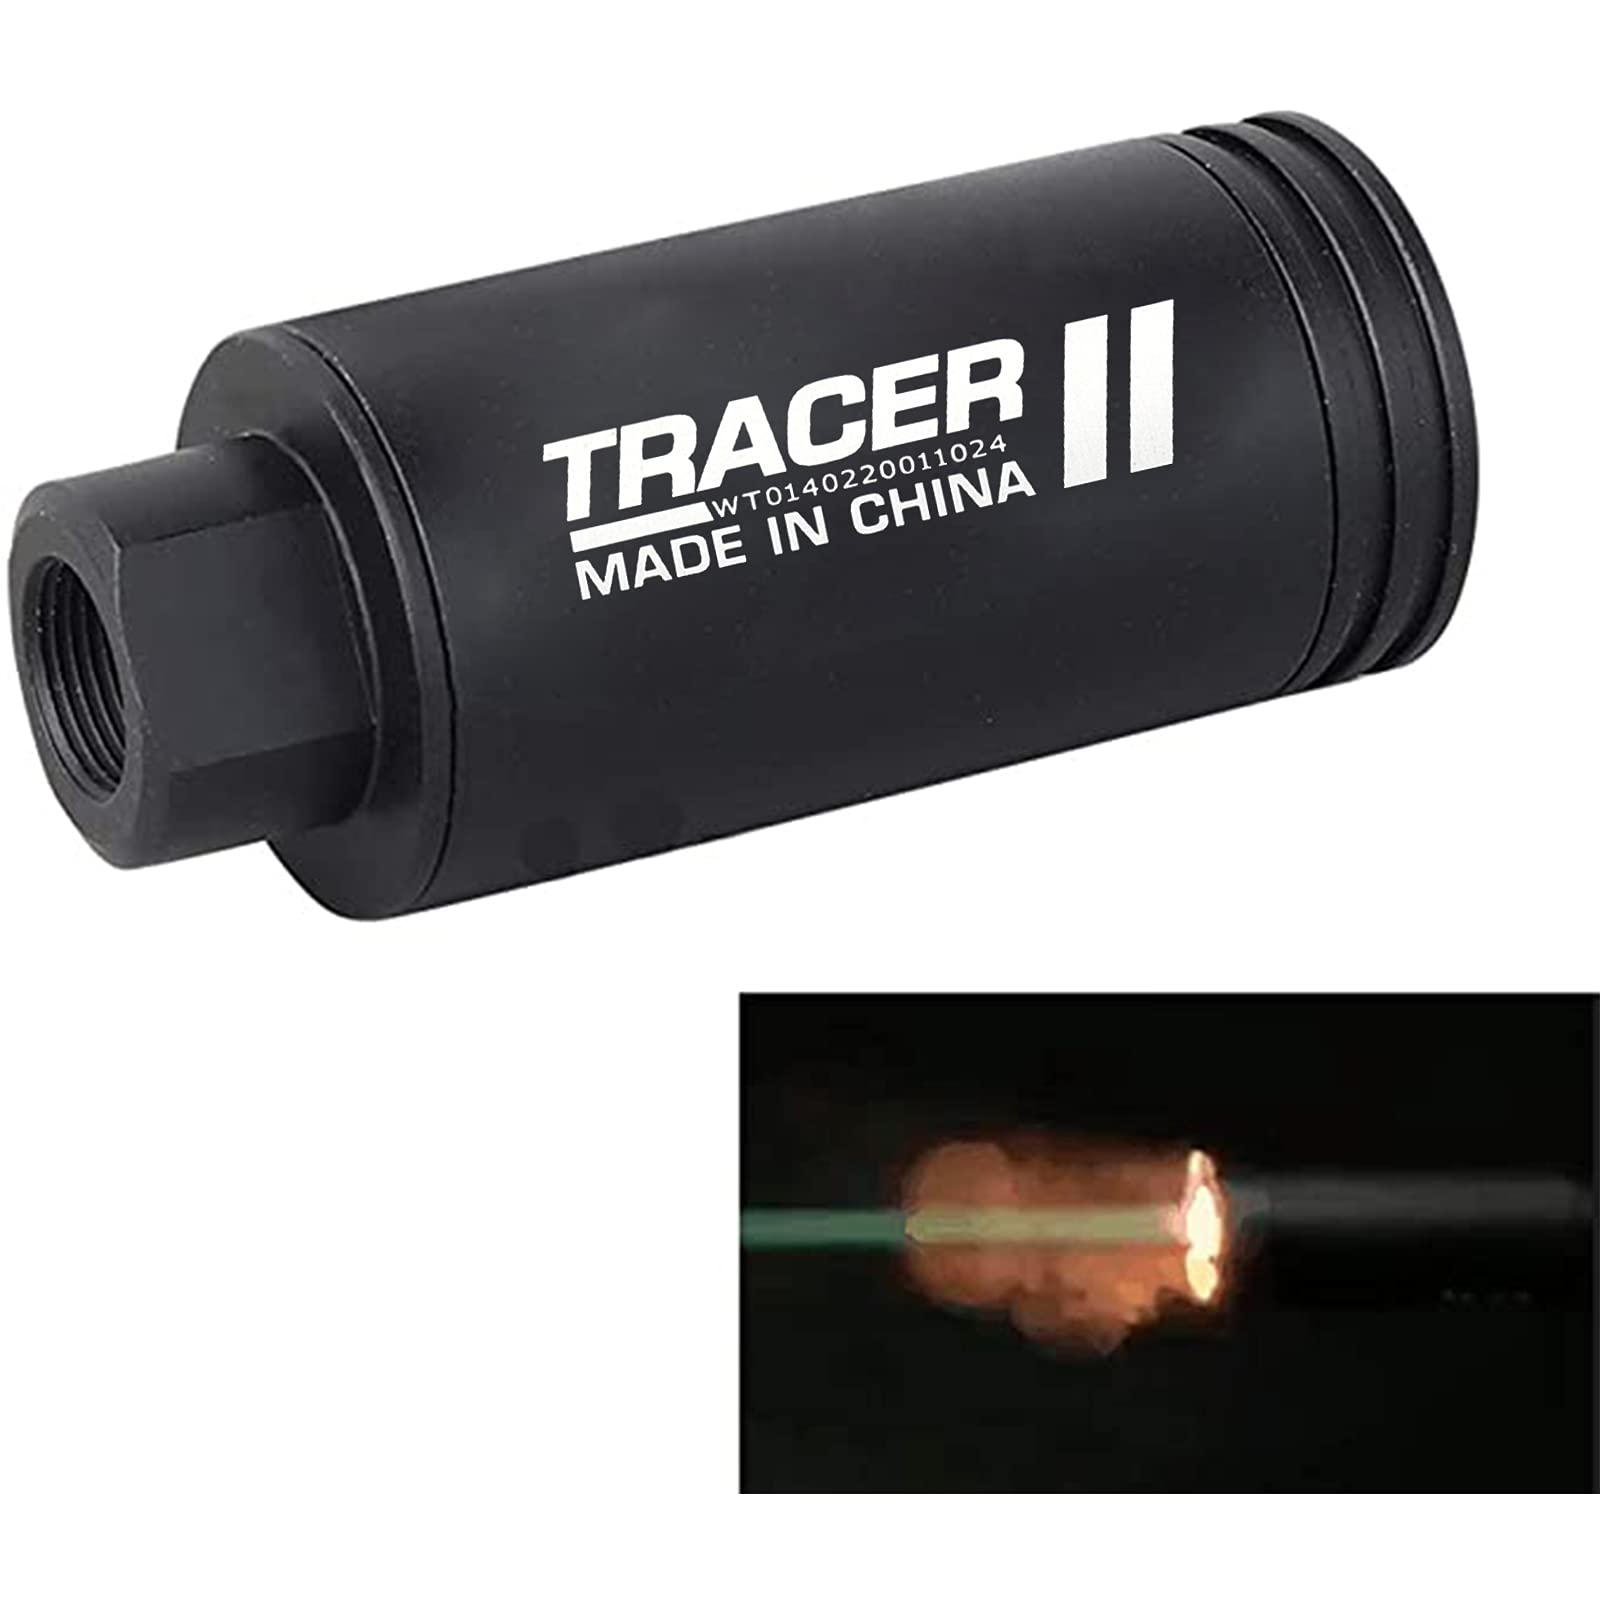 Paintball Airsoft Gun Tracer Lighter S 14mm/10mm Tactical Tracer Unit Glow  In Dark For Shooting Rifle Pistol Auto Tracer Q1118 From Musuo10, $92.47